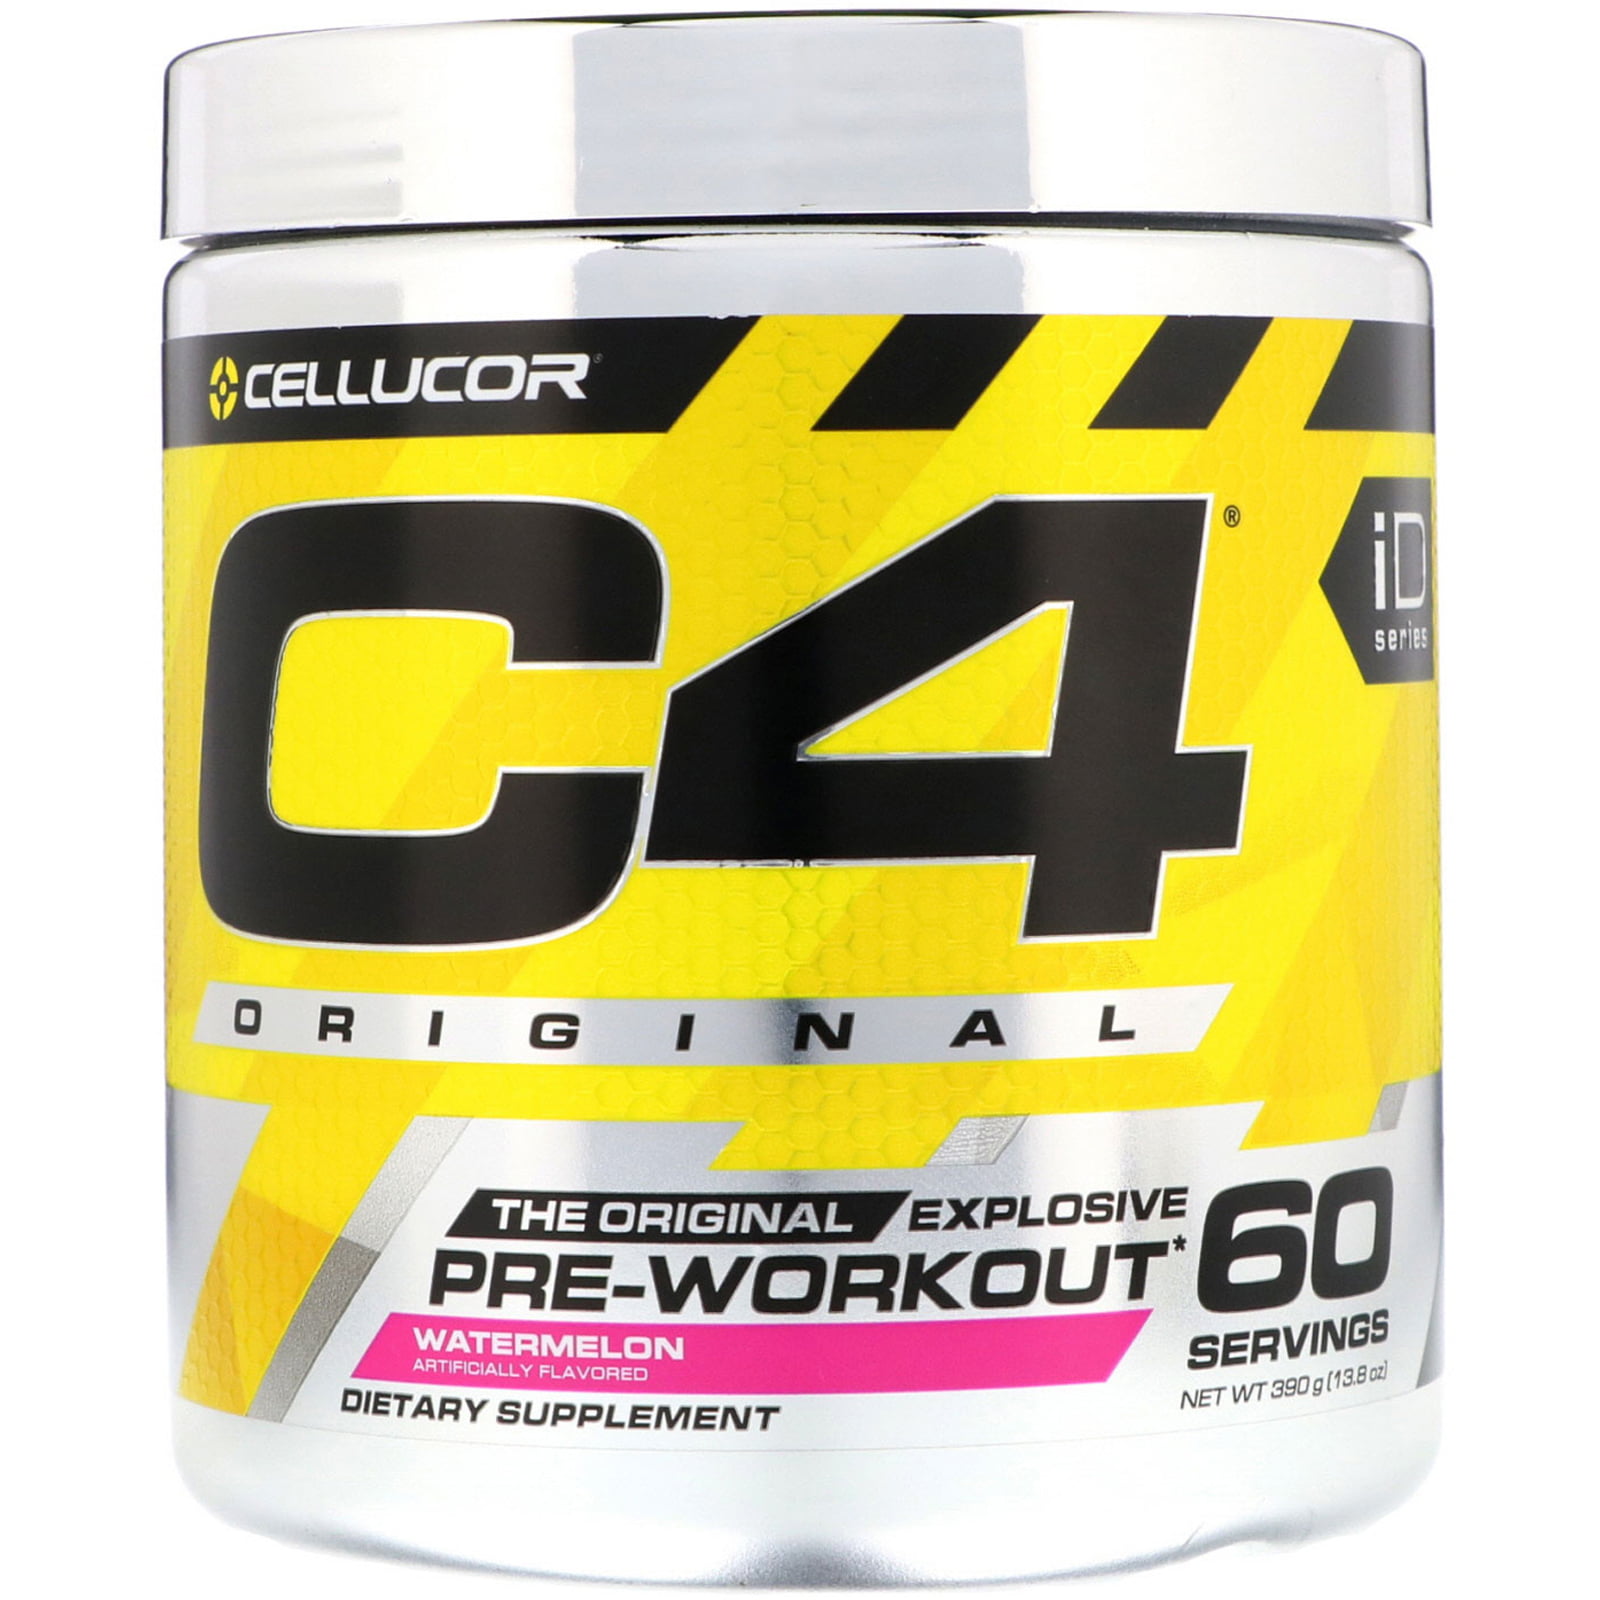 Simple Pre Workout Supplement C4 Review for push your ABS